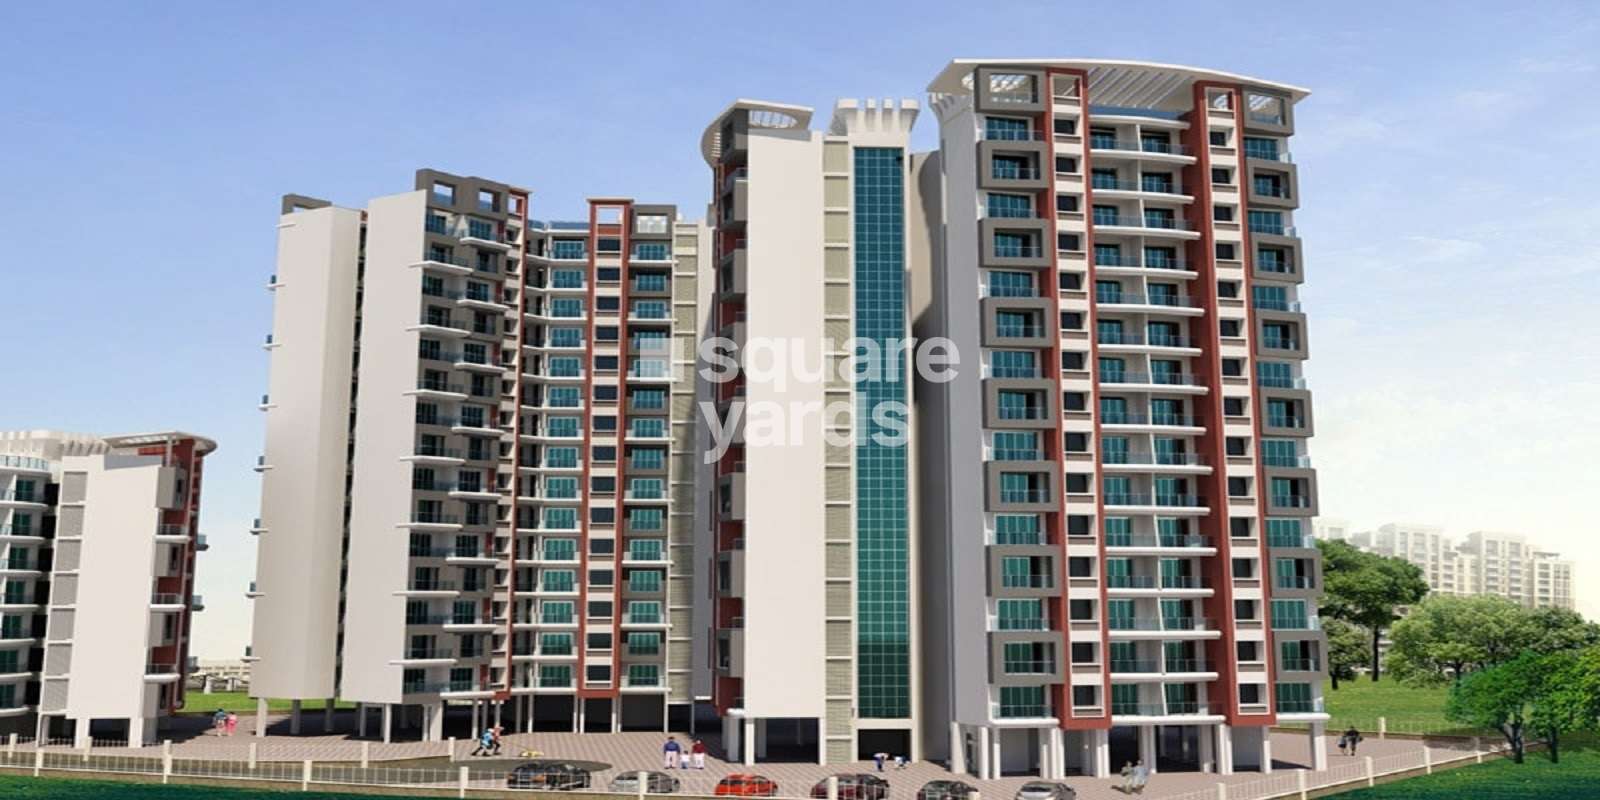 Damji Pentagon Heights Phase I Cover Image